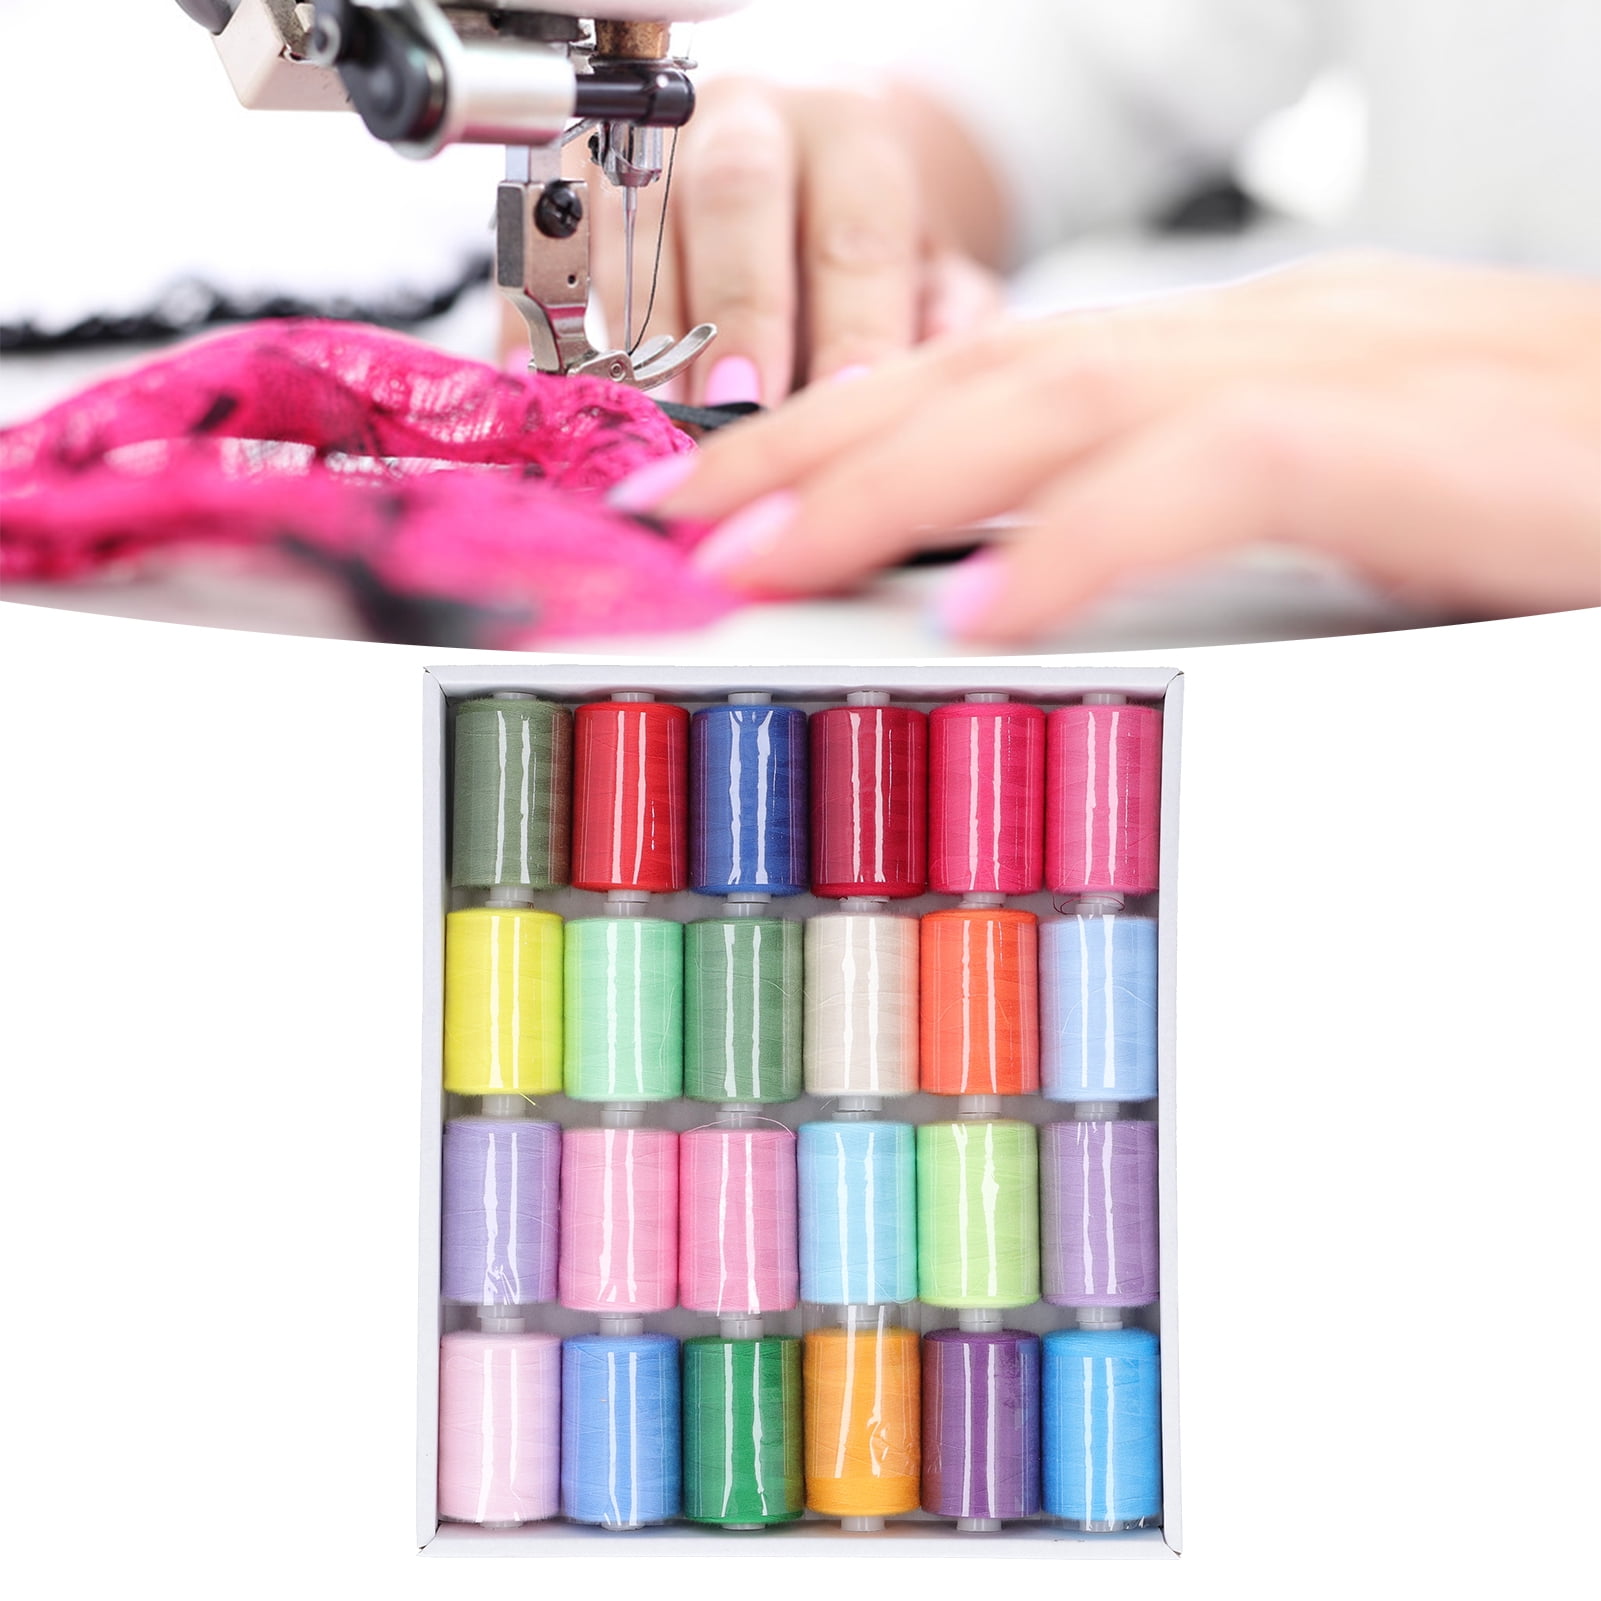 Sewing Machine Thread in Assorted Bright colors for Creative Hobbies Sewing Thread High Quality Threads for Tailors Hand Sewing and Quilting Polyester Overlock Thread 24 Pcs 1000 Yards 